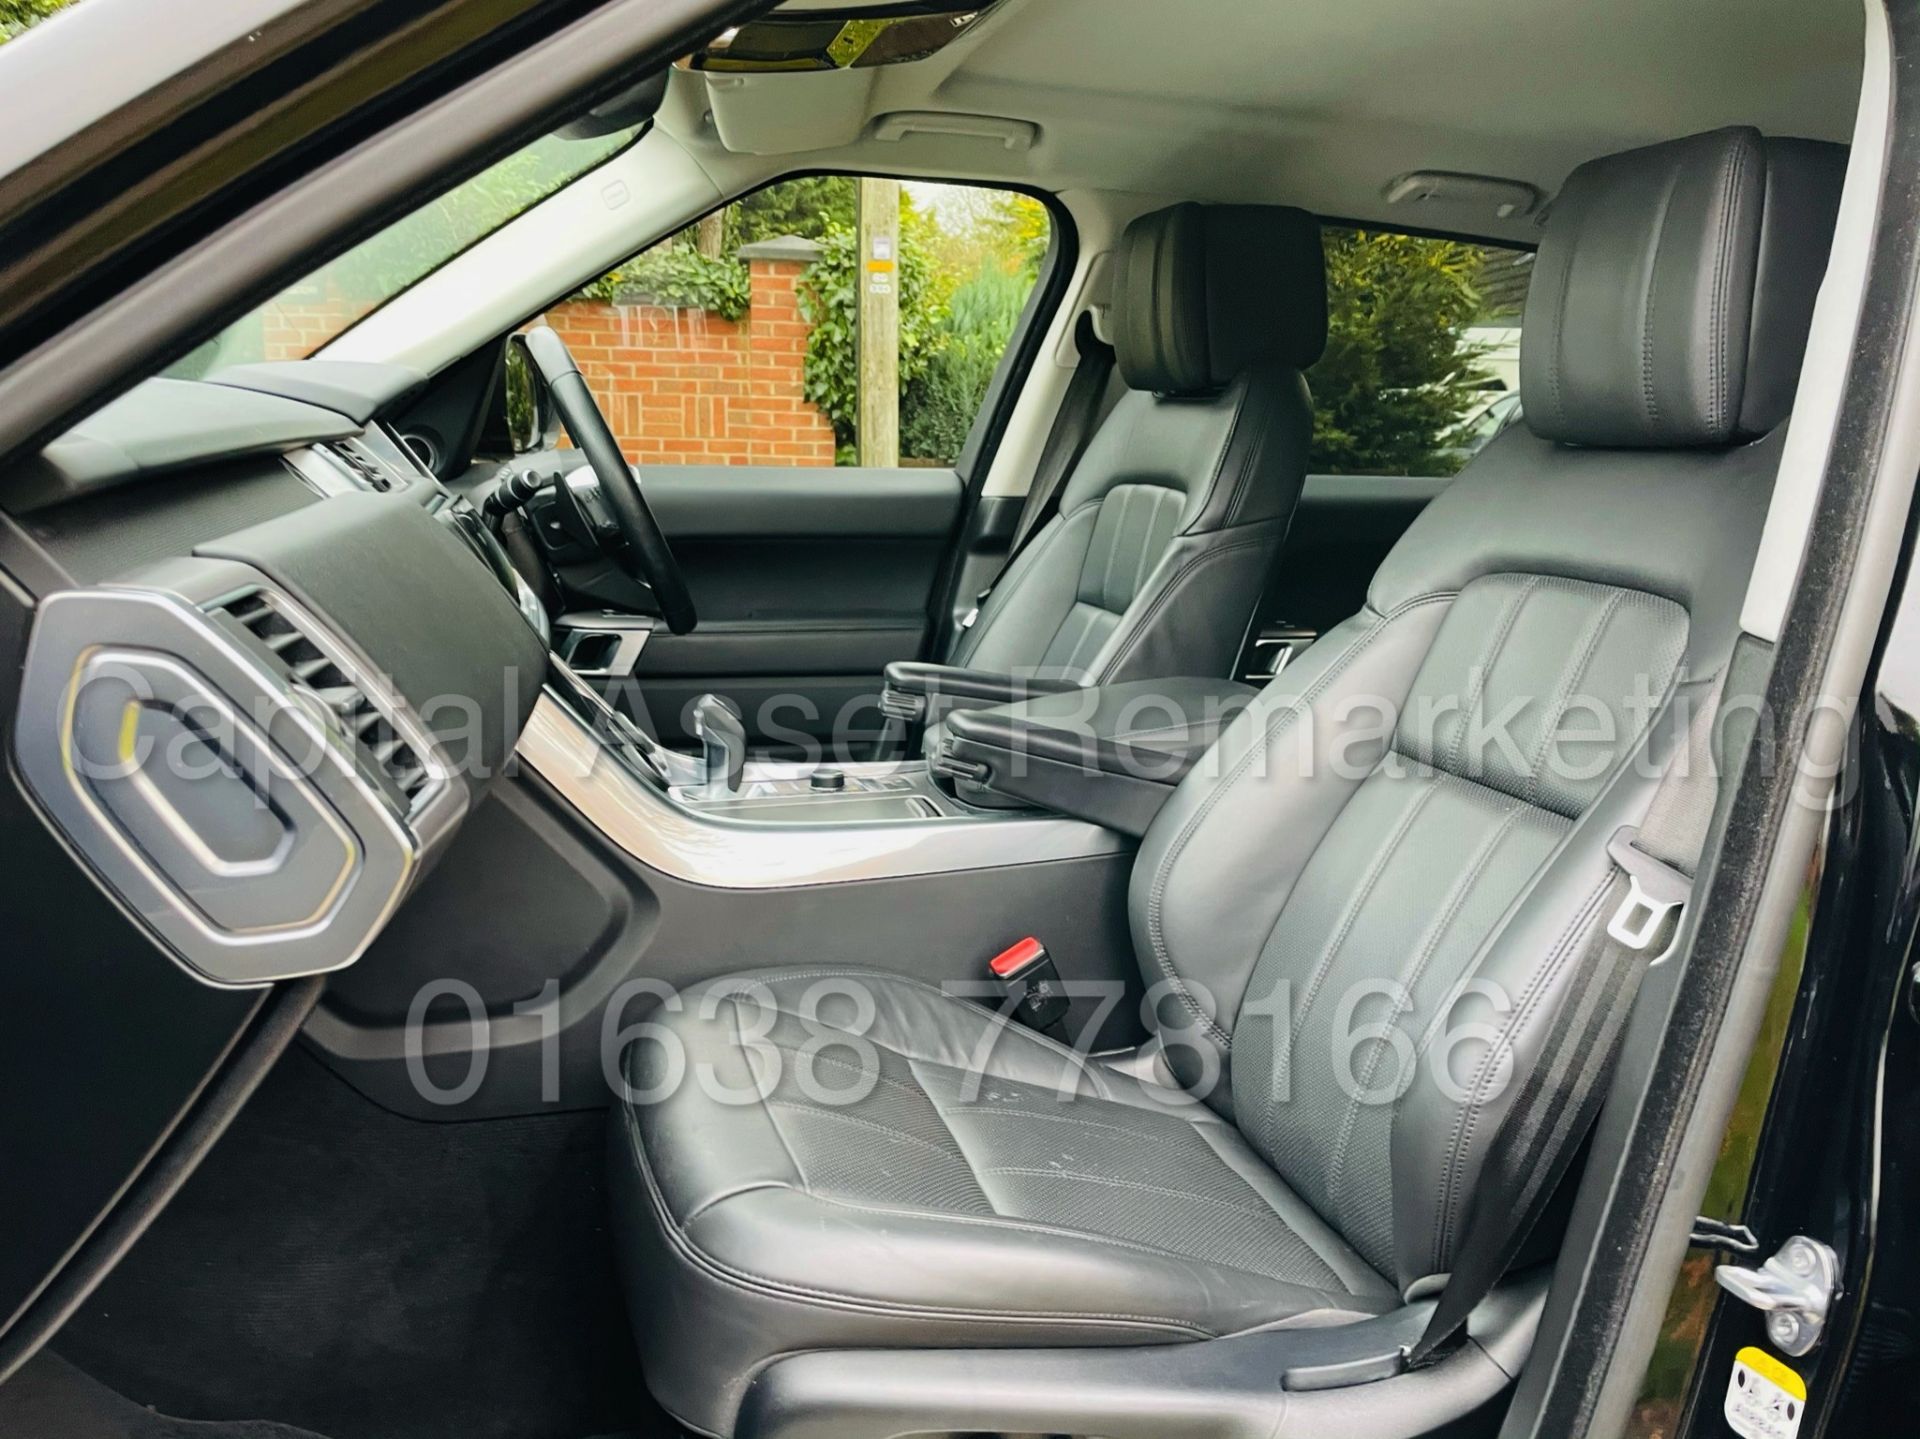 RANGE ROVER SPORT *HSE EDITION* SUV (2019 MODEL) '3.0 SDV6 - 306 BHP - 8 SPEED AUTO' *FULLY LOADED* - Image 25 of 56